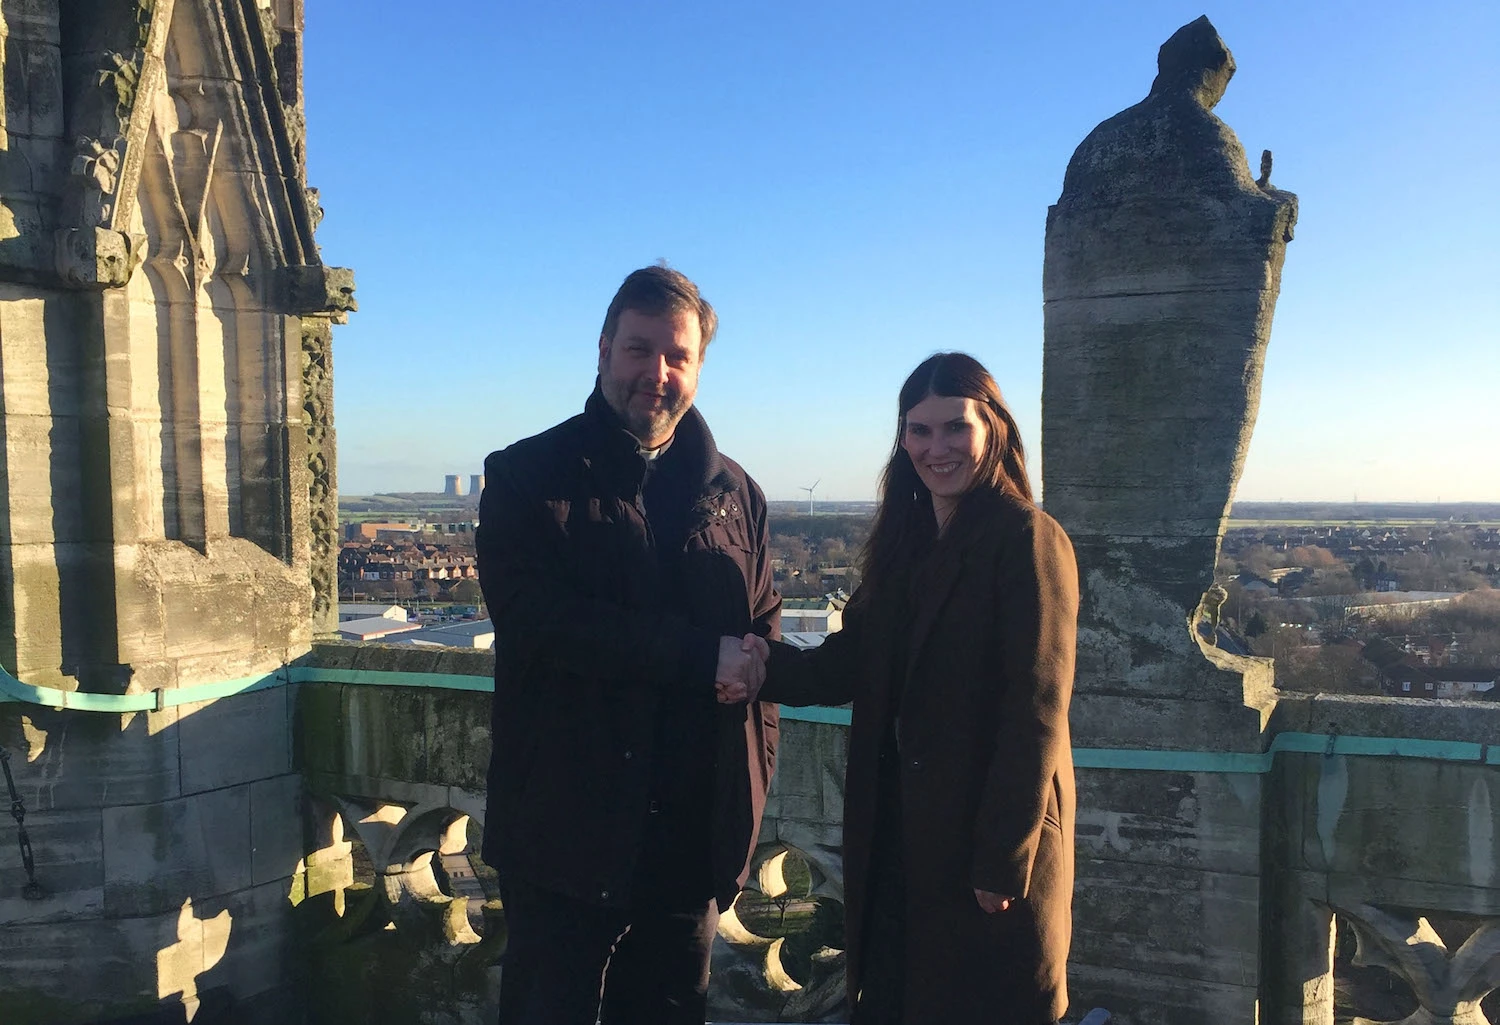 Vicar of Selby Abbey, The Reverend Canon John Weetman with Hayley Silvester, Head of Sales, Quickline, on top of Selby Abbey